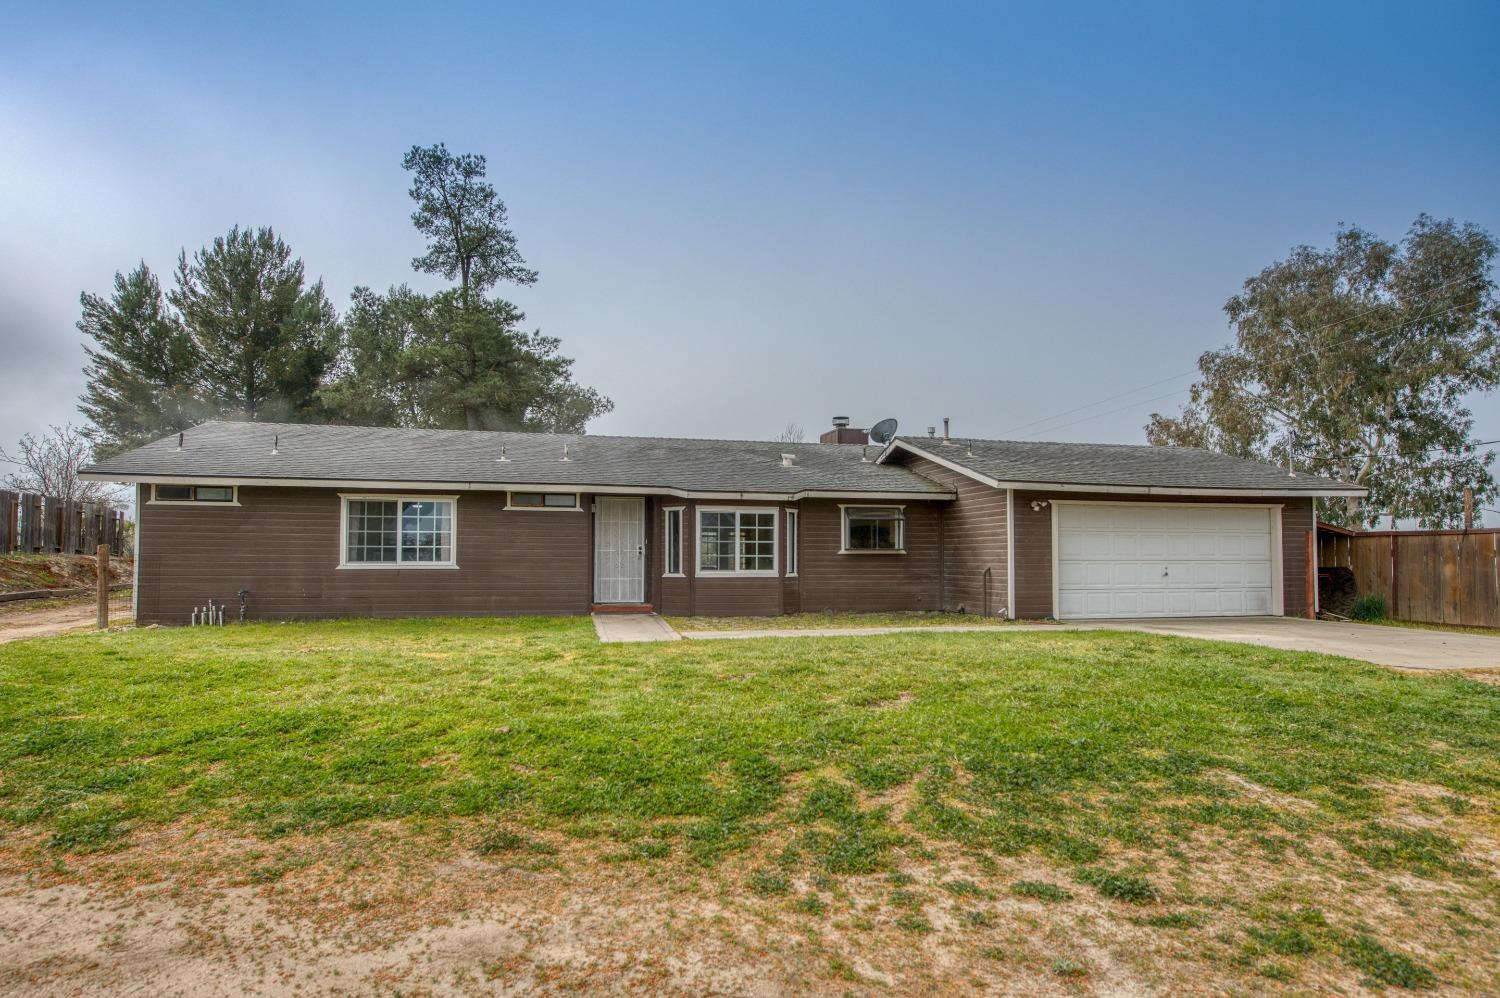 Photo of 8326 Rabbit Hollow Pl in Paso Robles, CA